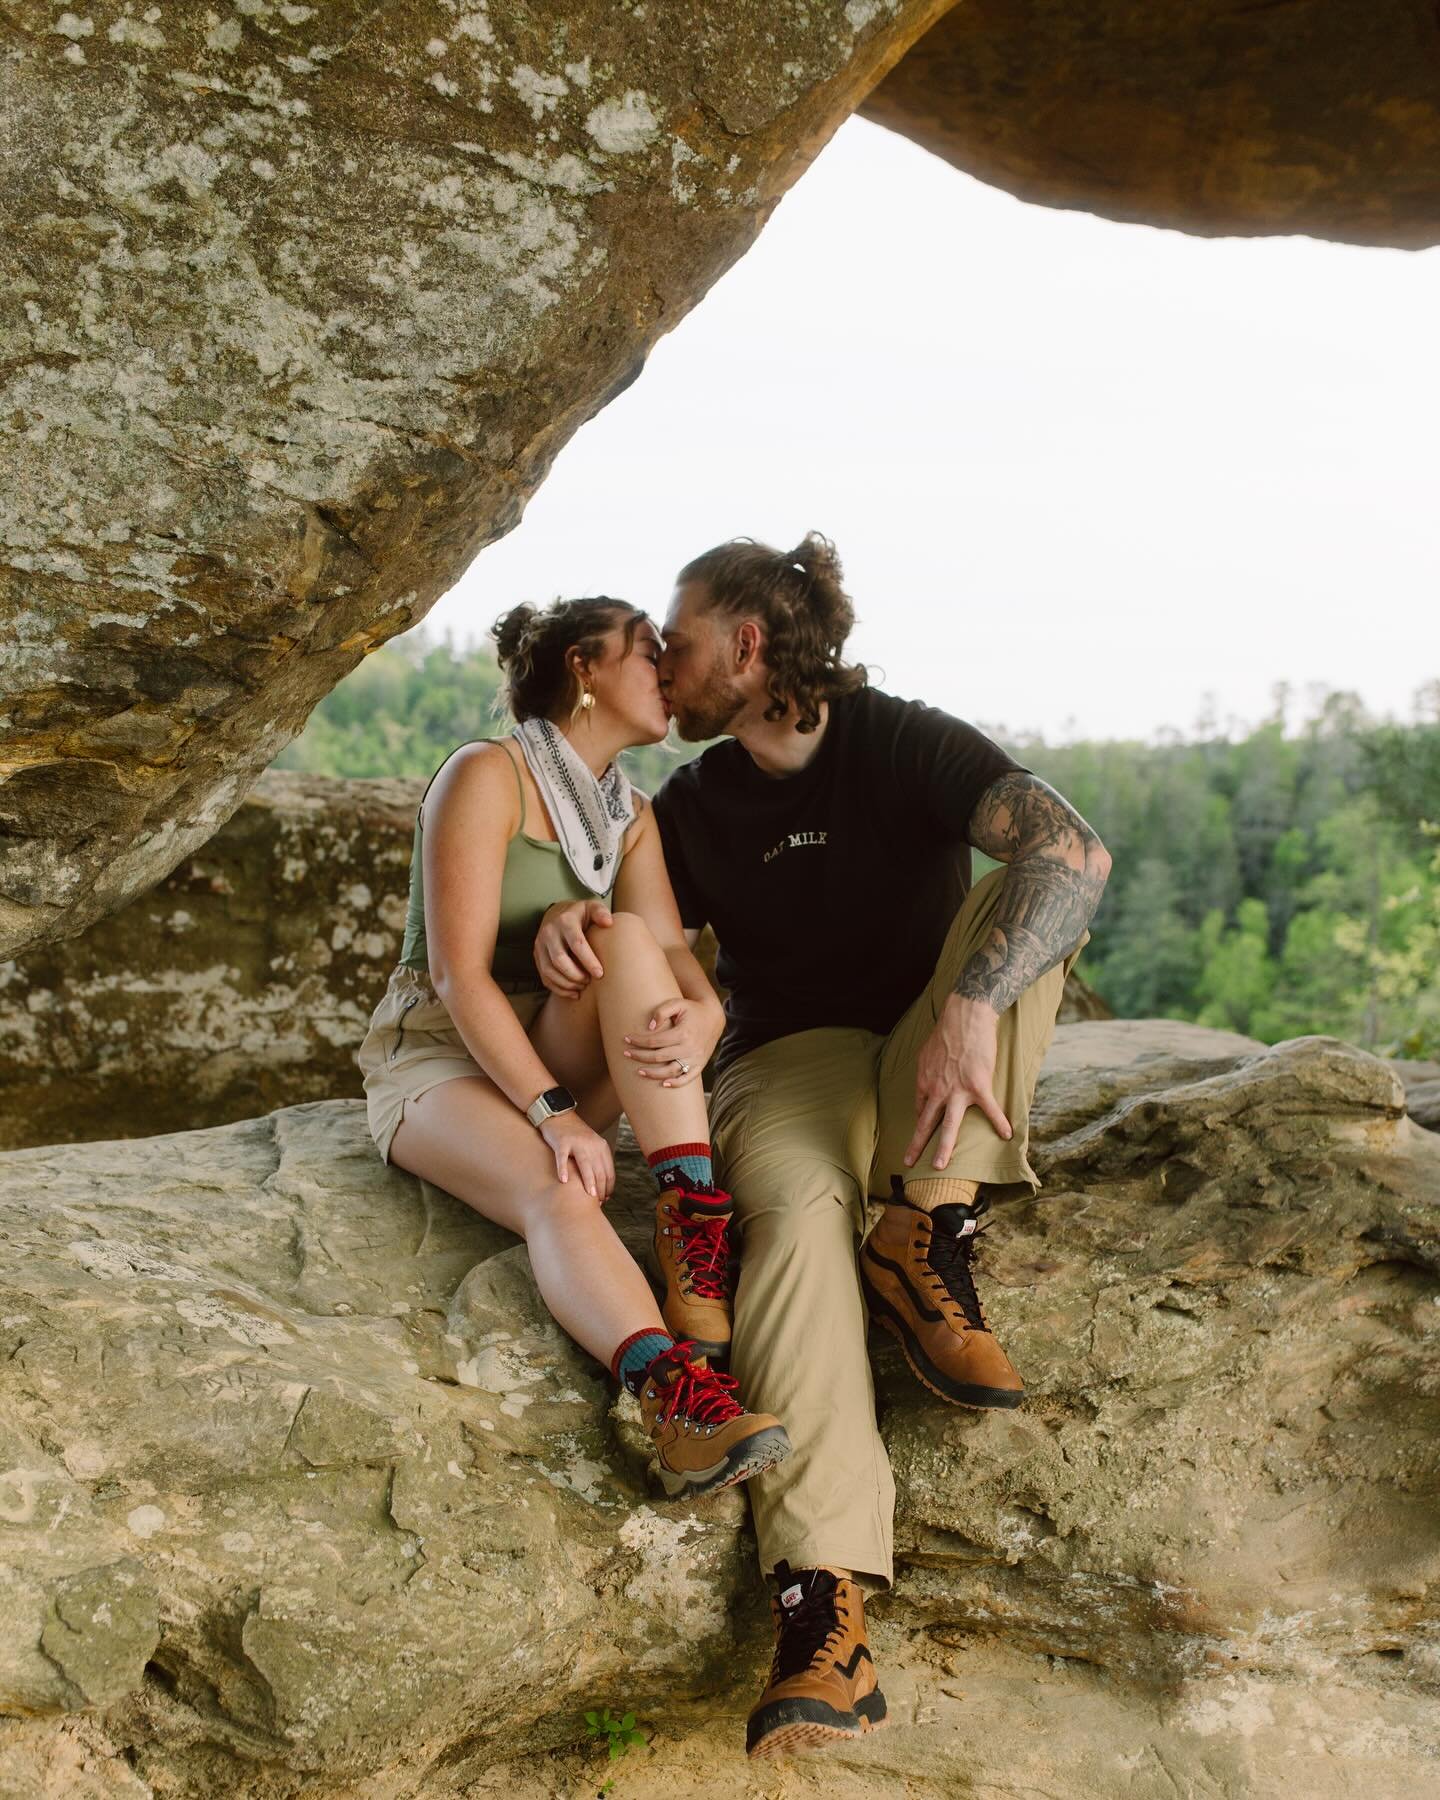 Congrats to Sam &amp; Nate, who got engaged last night out in Red River Gorge!! They told me they were camera shy, but they must&rsquo;ve been lying cause they&rsquo;re cute cute. 

#skybridgeredrivergorge #redrivergorge #redrivergorgewedding